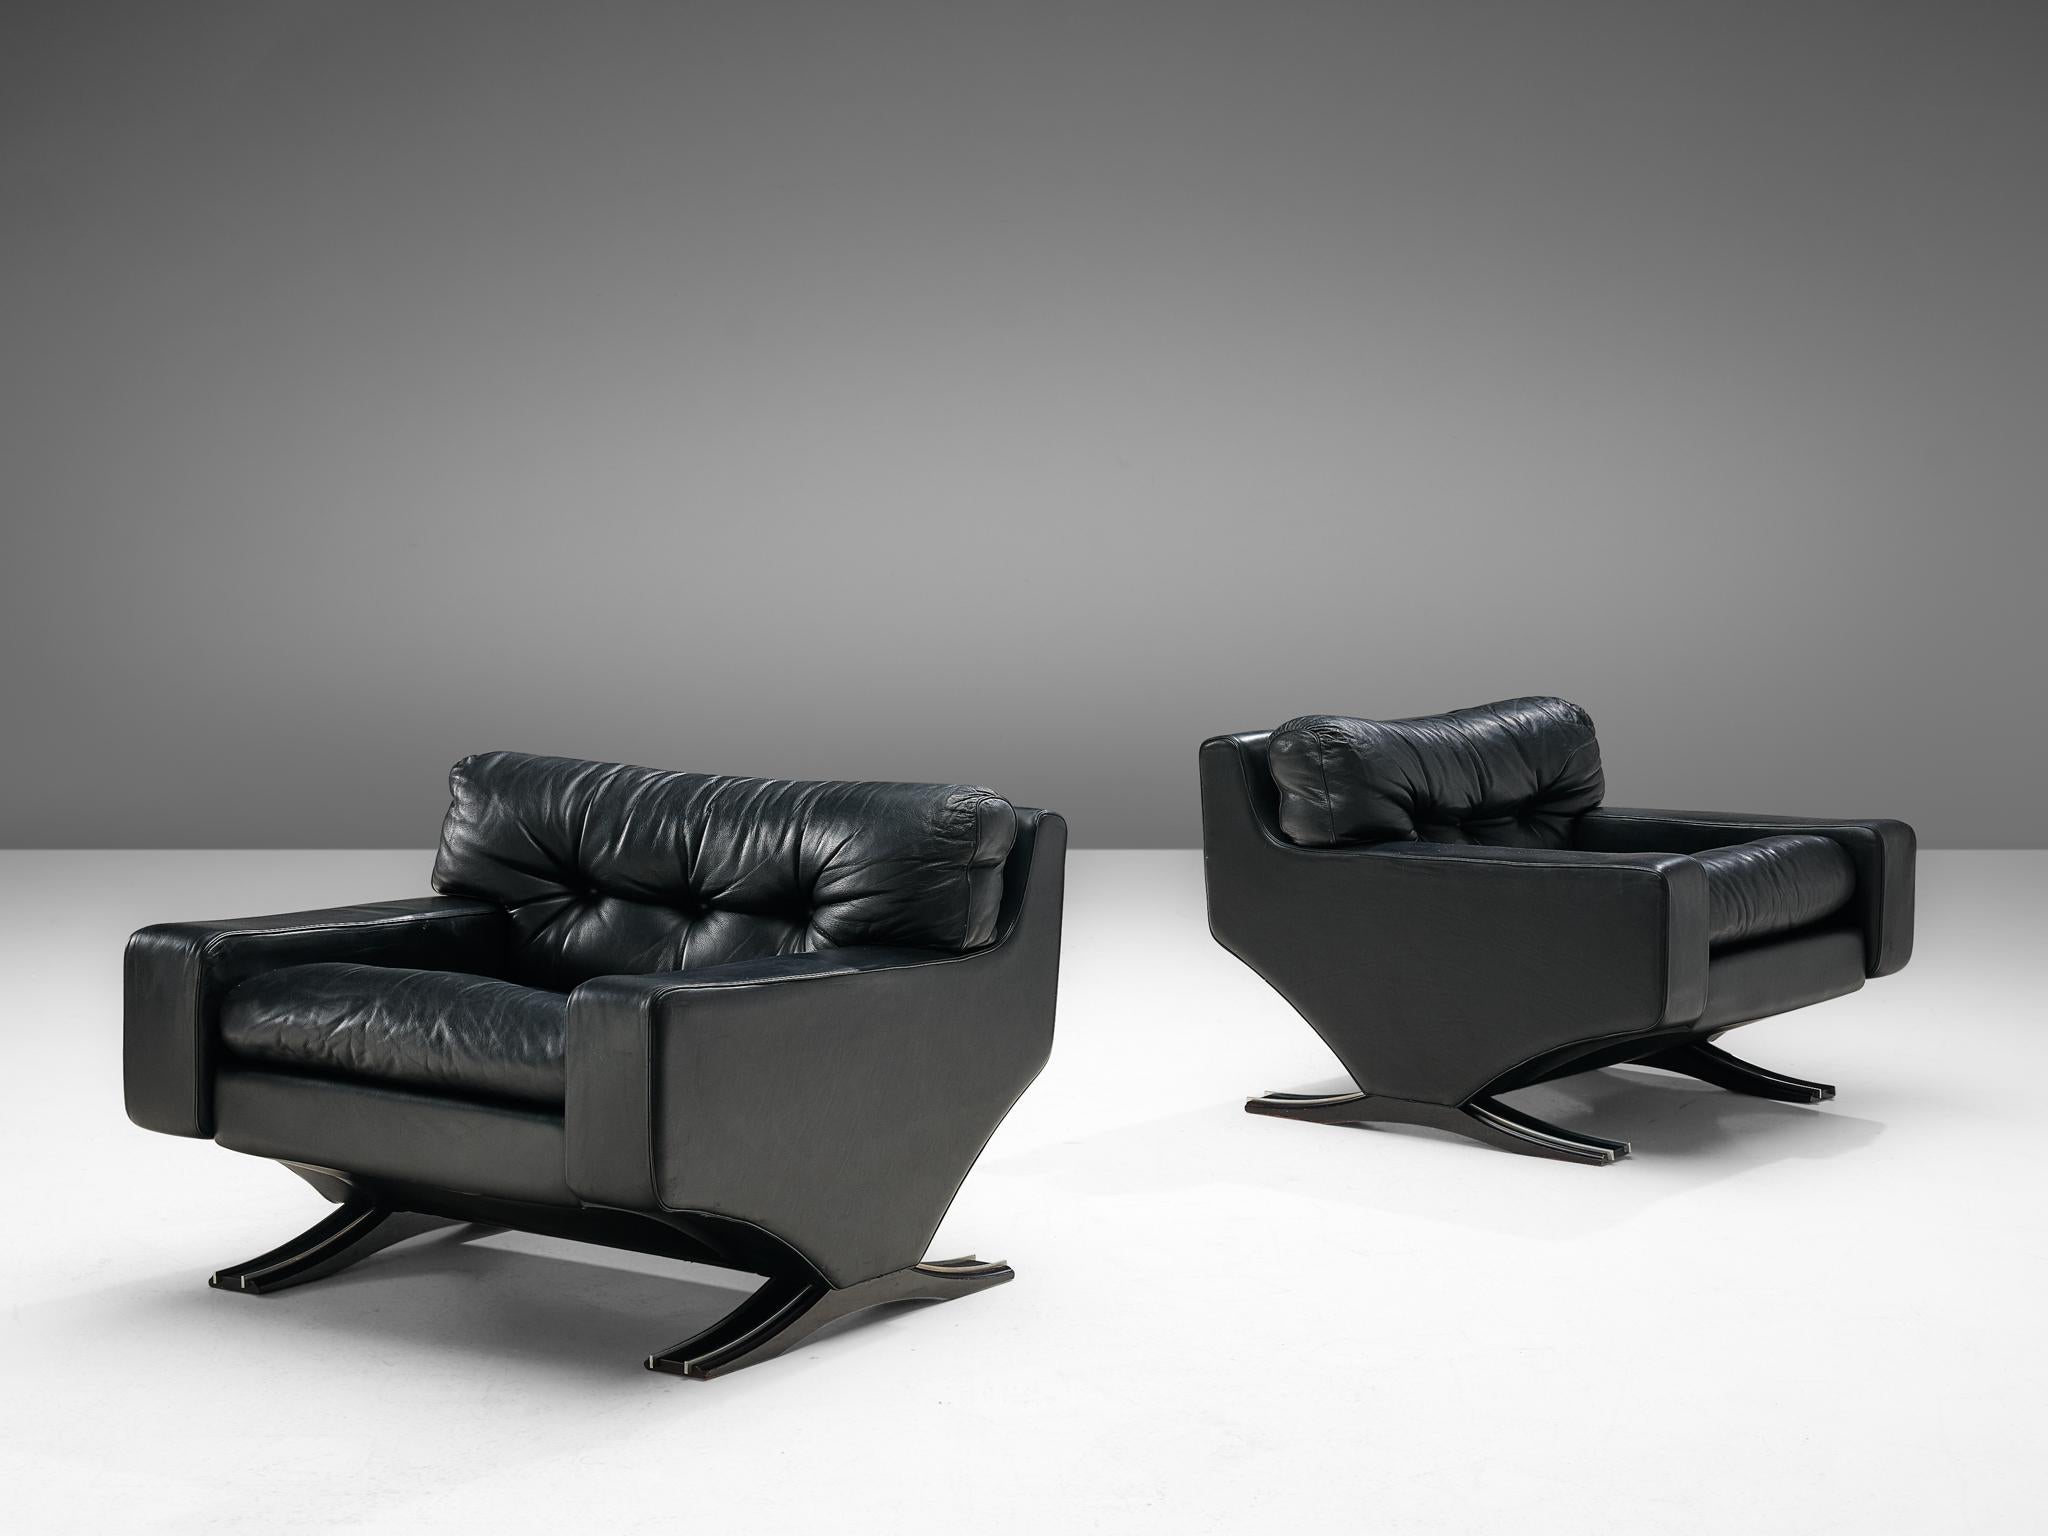 Franz Sartori for Flexform, pair of lounge chairs, leather and beech, Italy, 1960s

Sturdy pair of lounge chairs in black leather by the Italian sculptor Franz Sartori. These chairs feature a modern design due to the straight lines. The waved